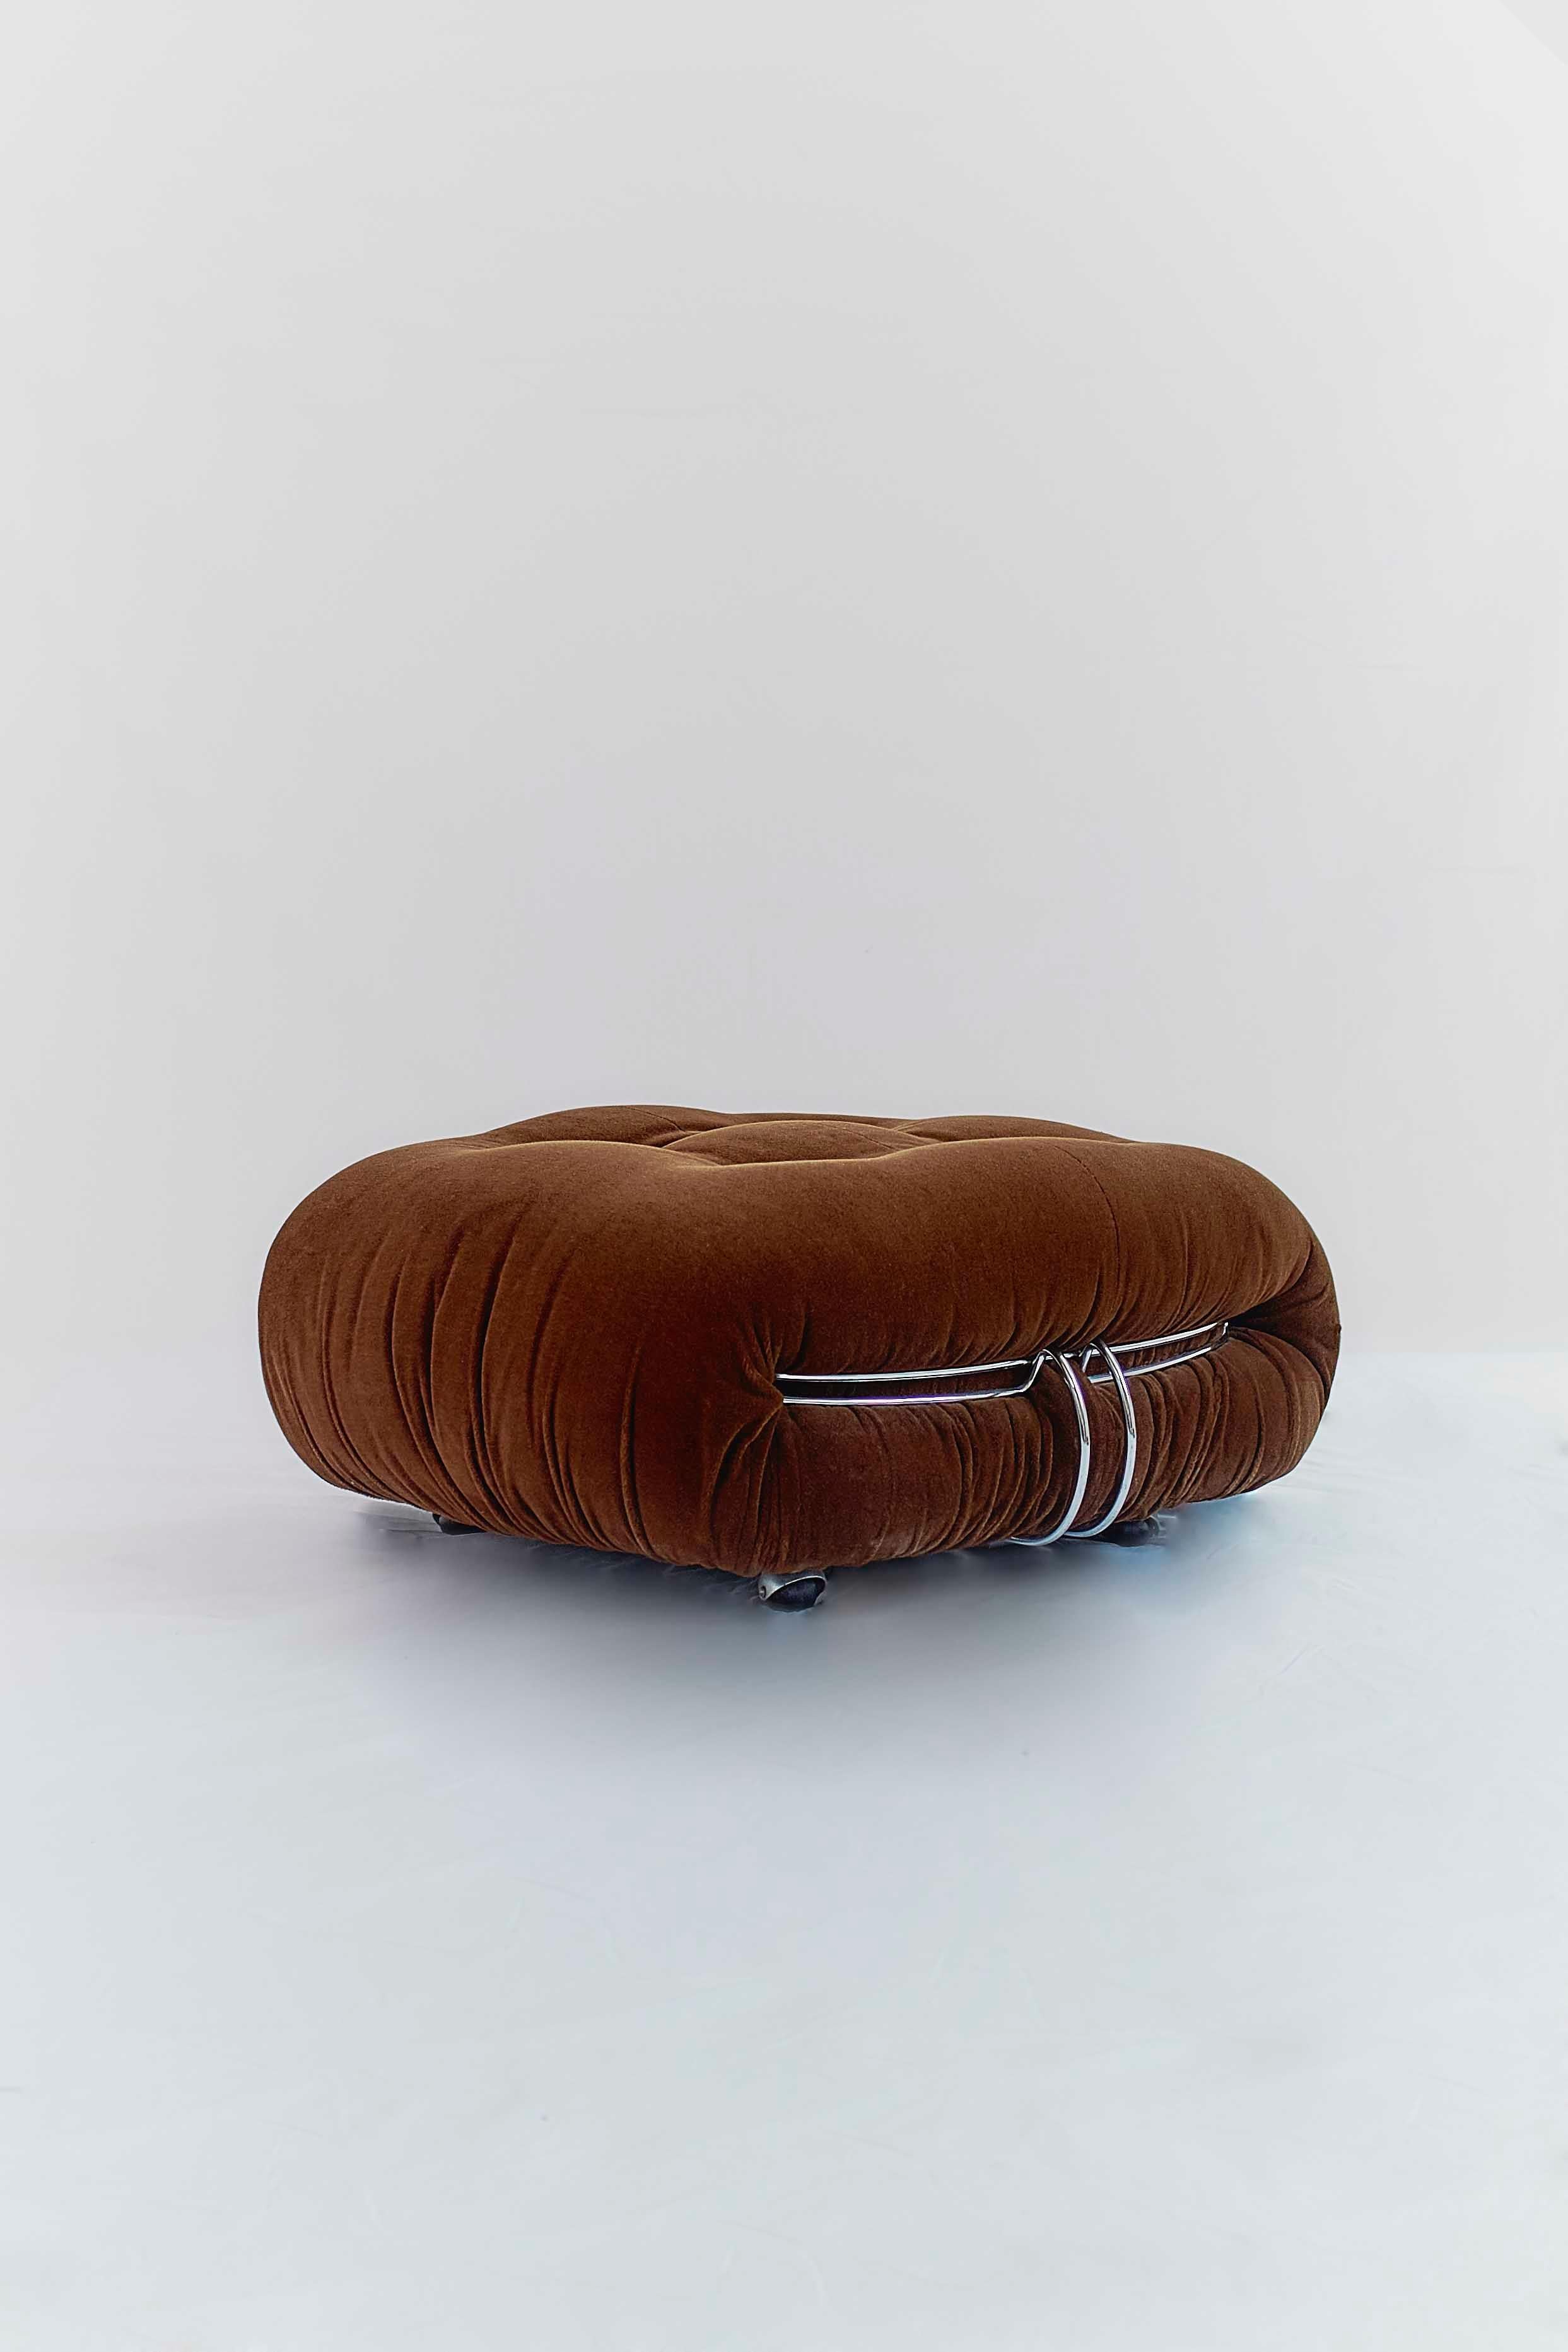 Tobia Scarpa Pair of Soriana Lounge Chairs and Ottoman, Cassina, Italy, 1970 3